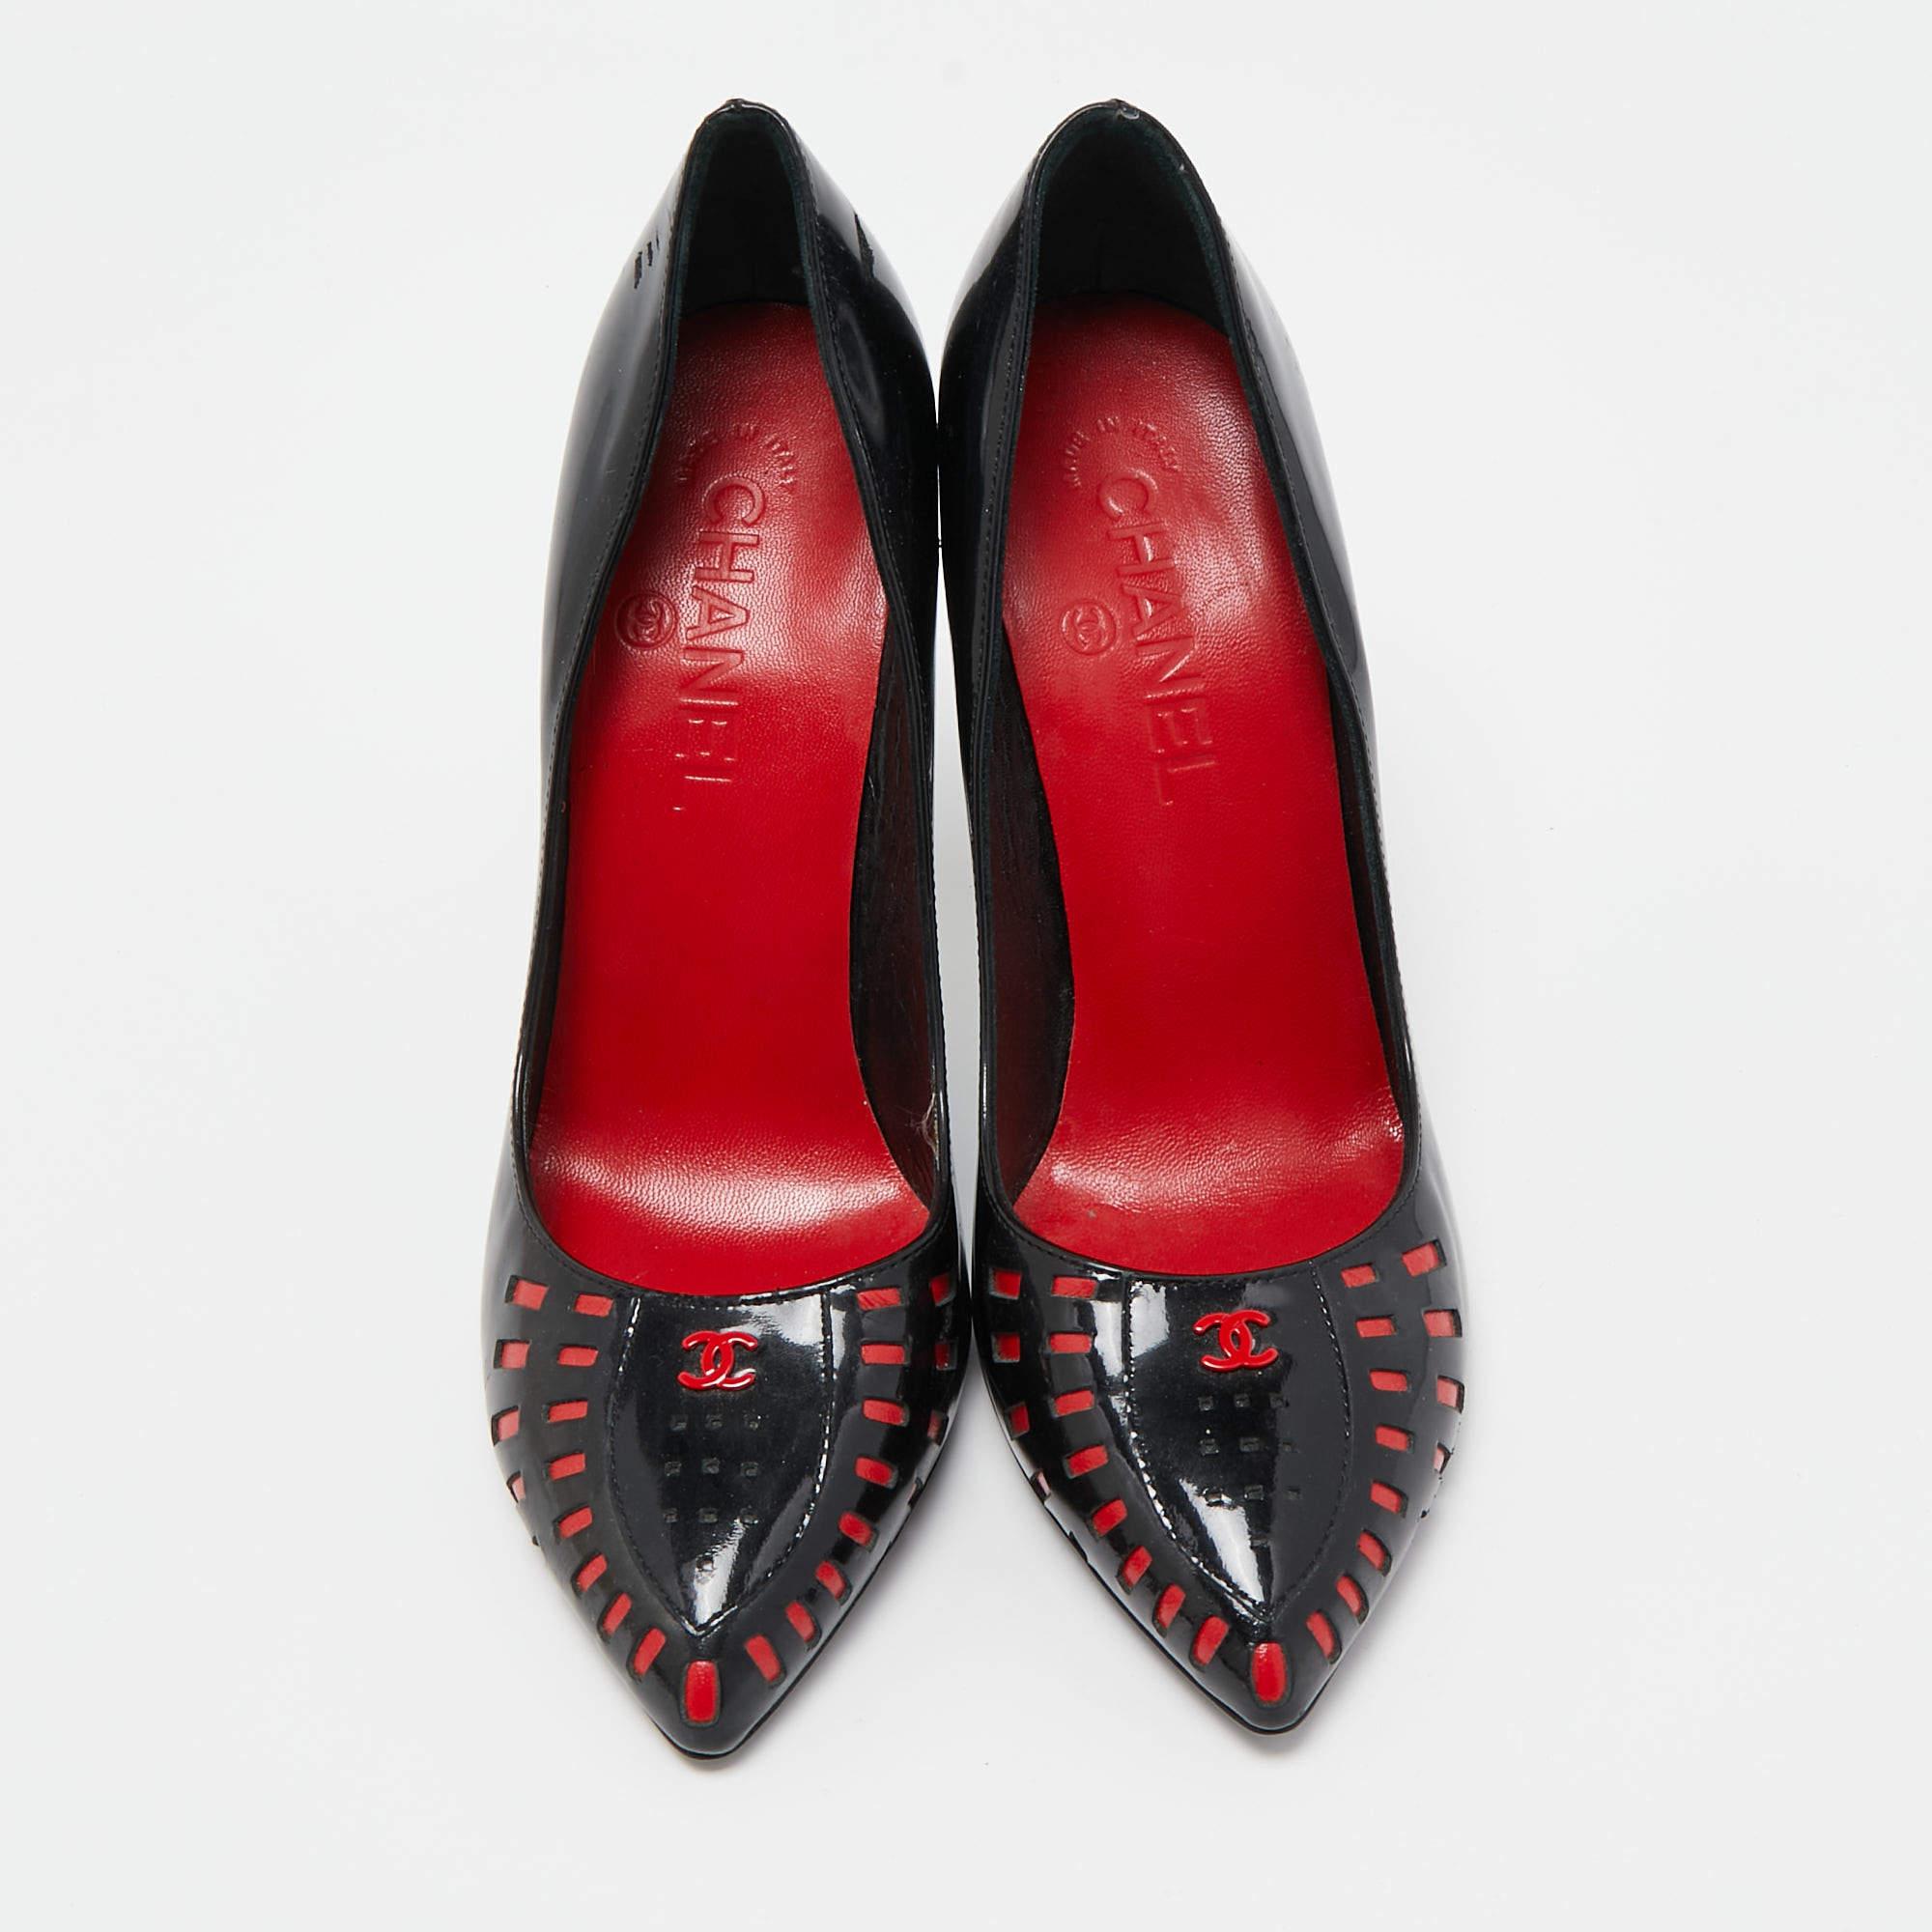 Women's Chanel Black/Red Patent Pointed Toe Pumps Size 38 For Sale